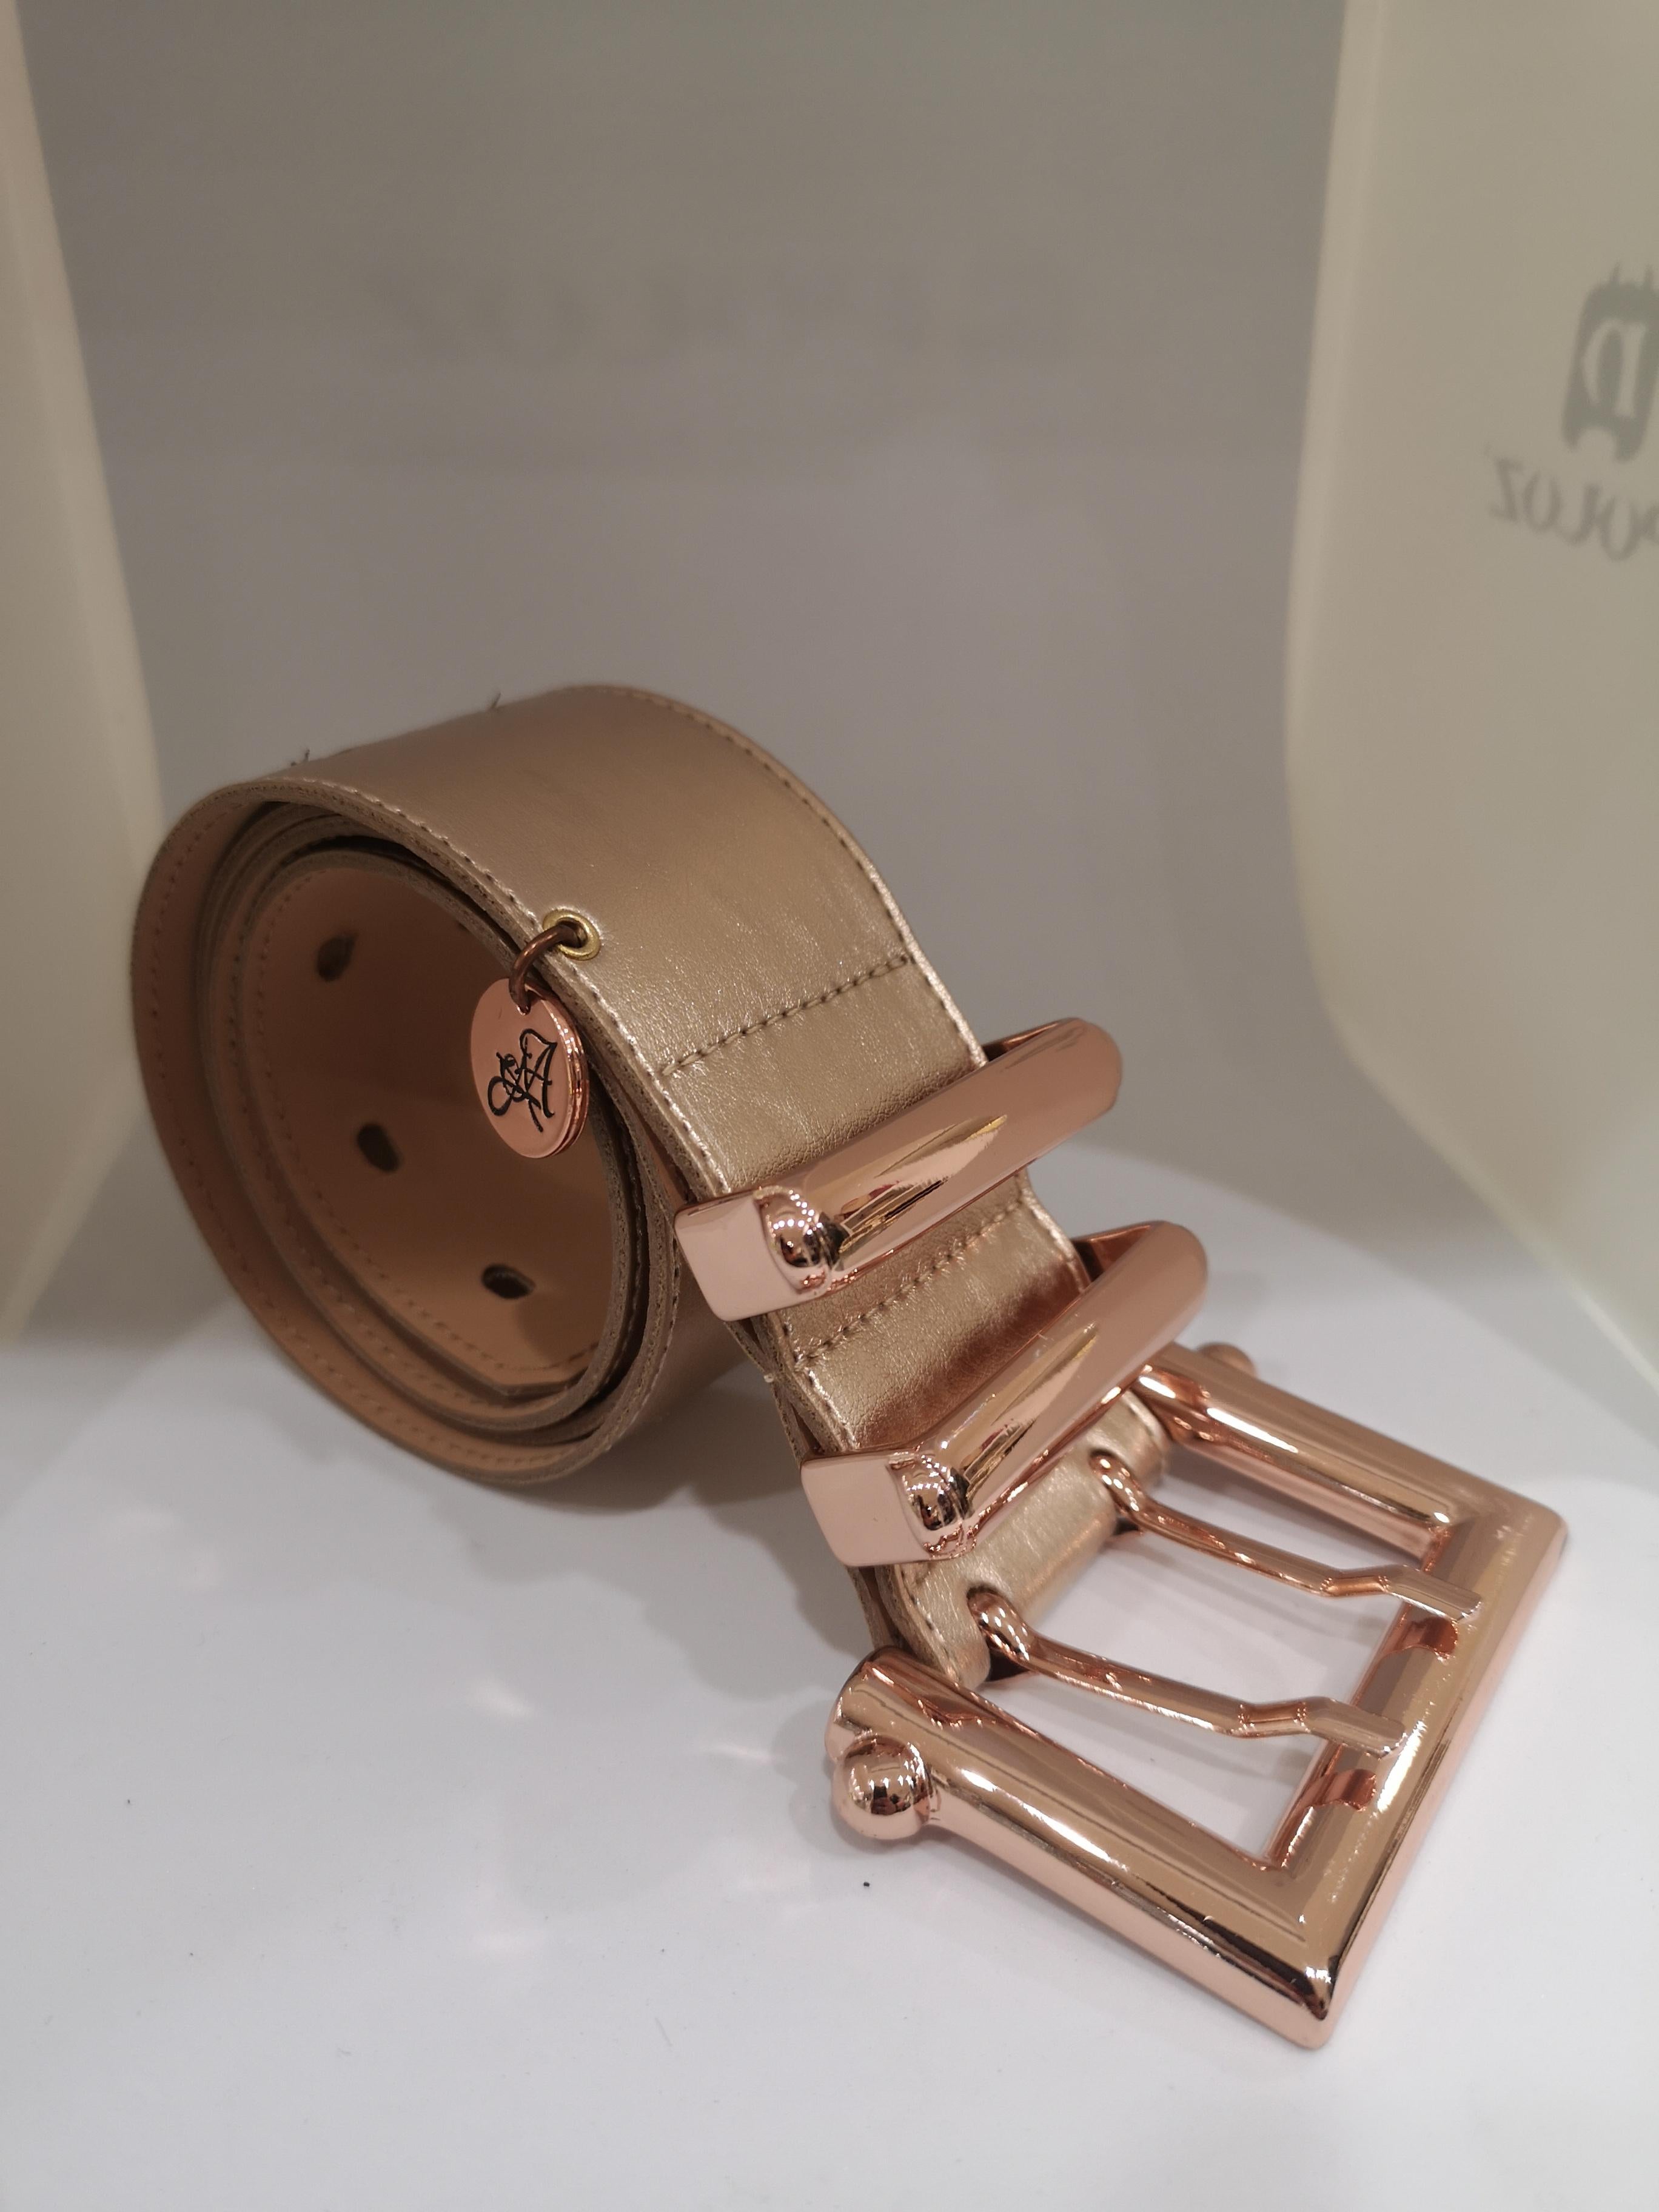 Rose gold leather belt
totally handmade in italy
total lenght 95 cm + 5 cm buckle